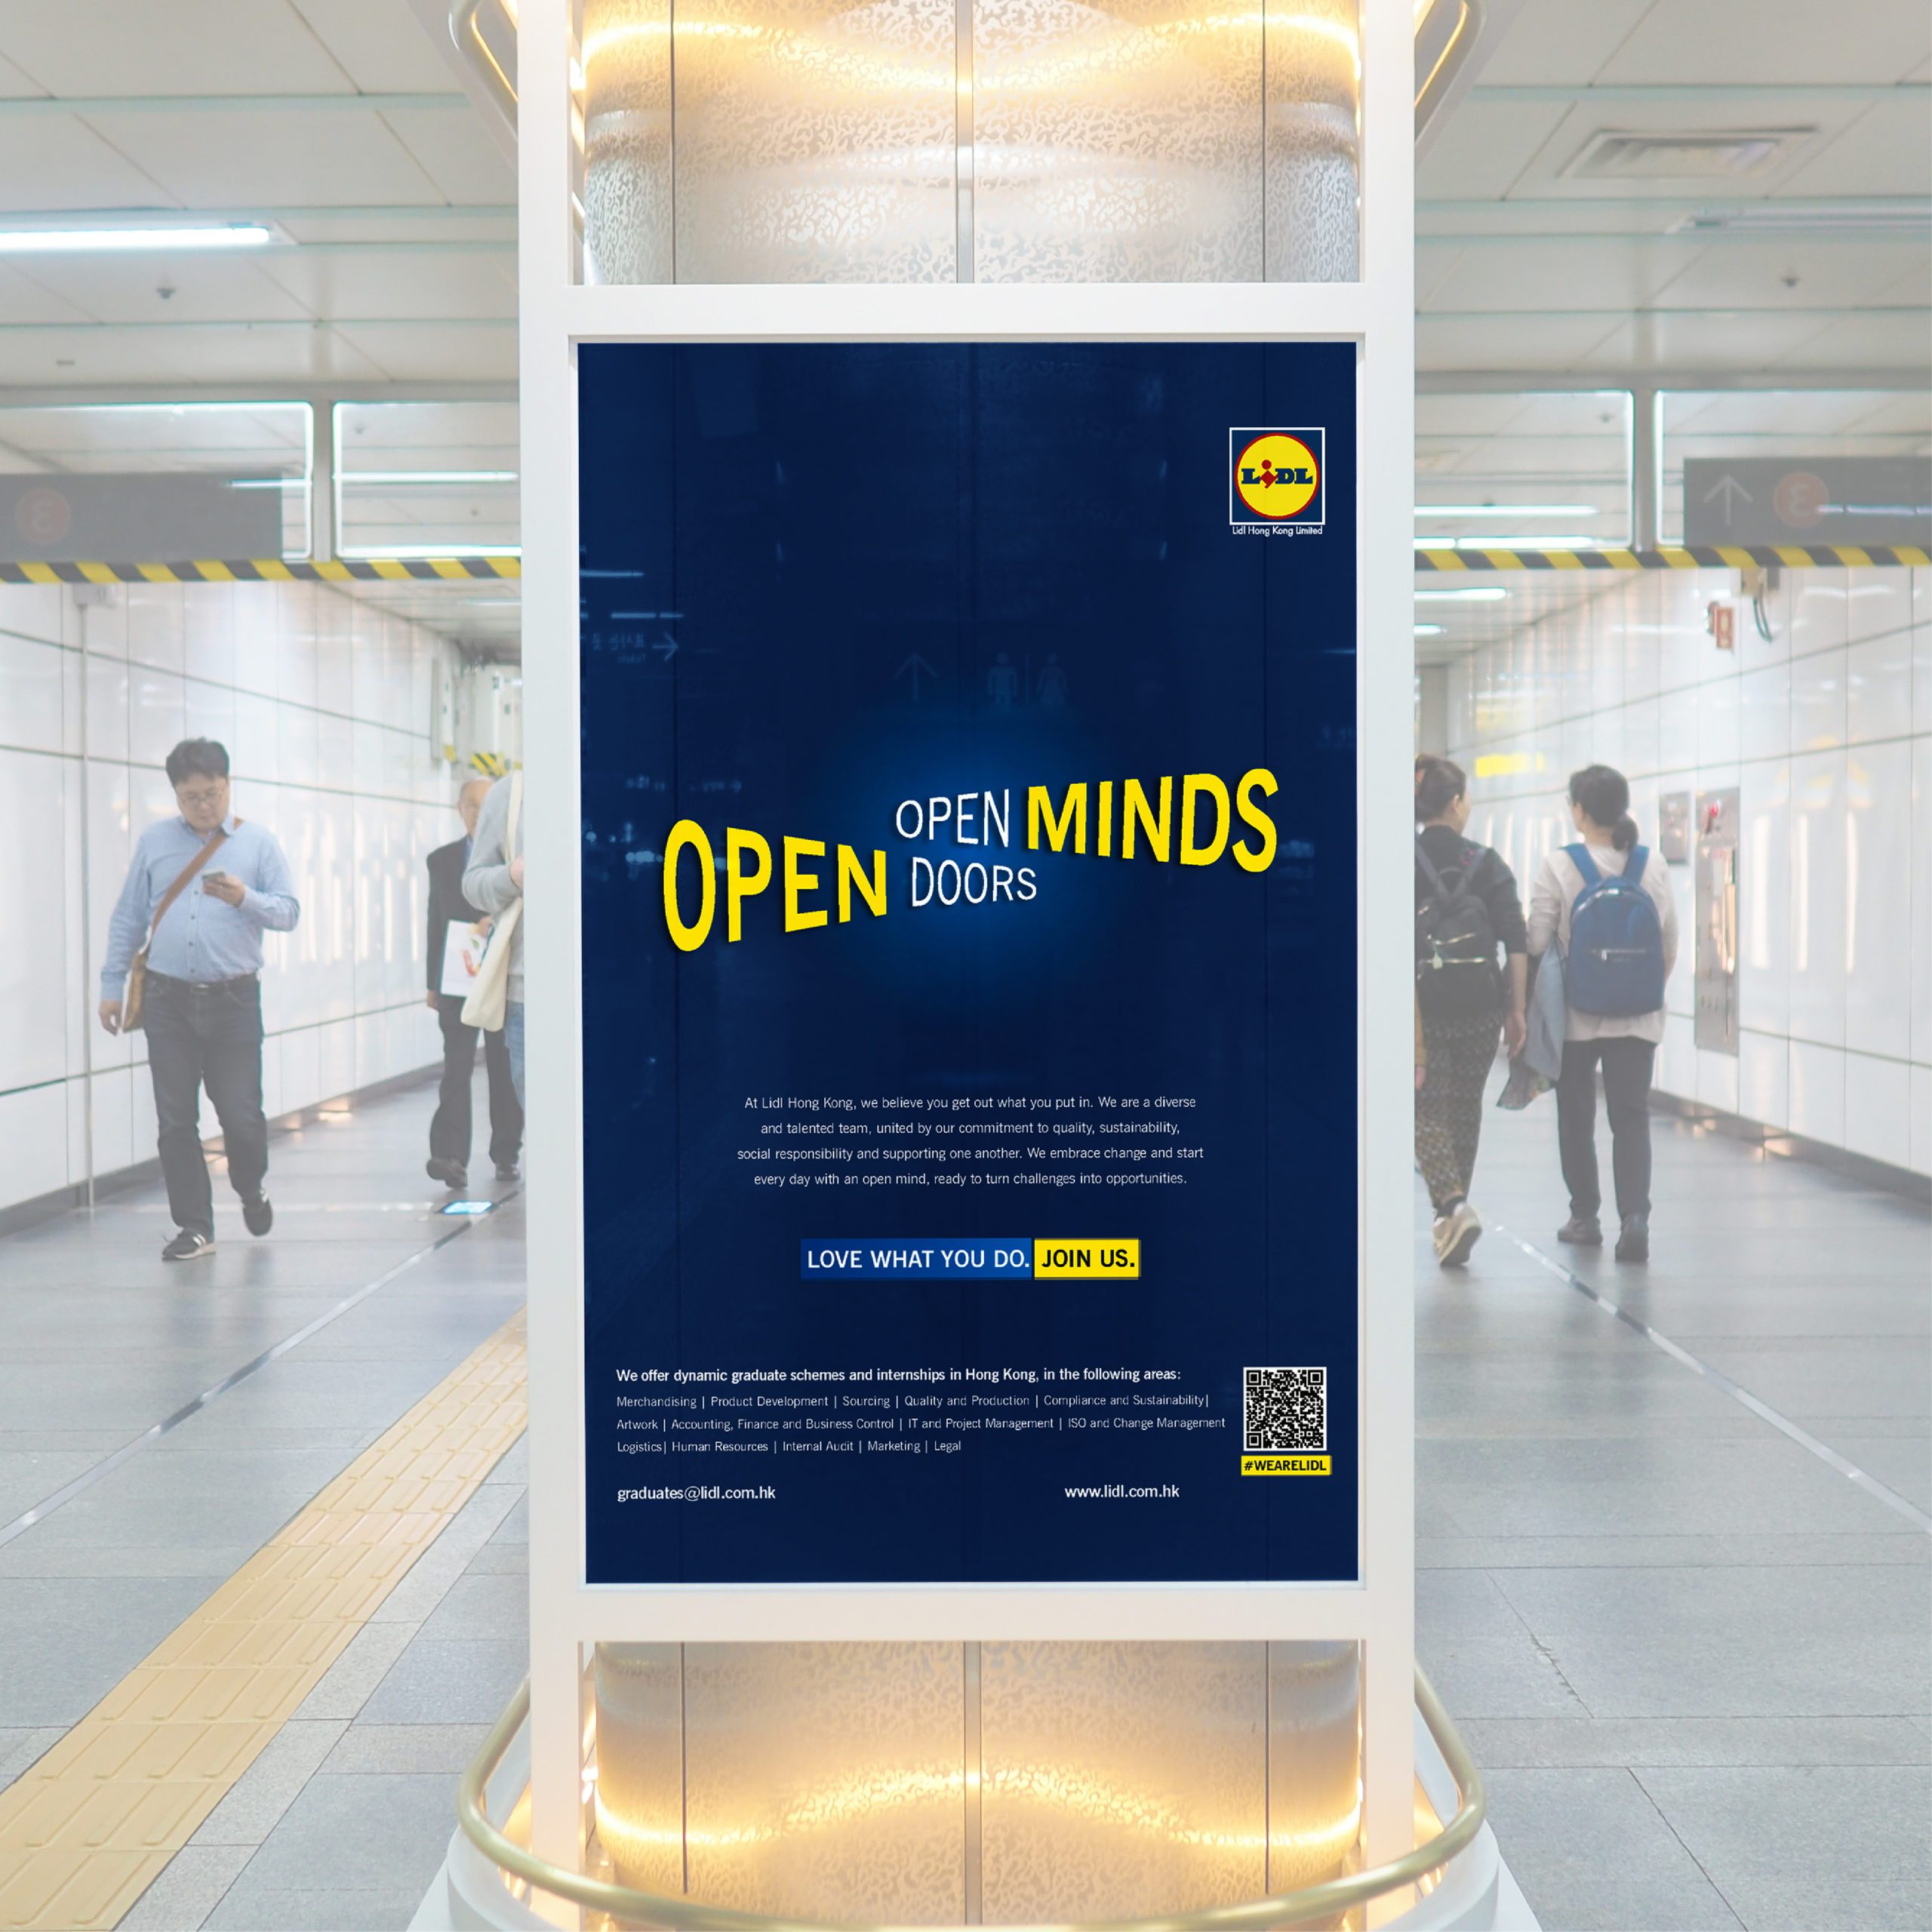 Lidl Hong Kong Marketing Campaign portrait advertisement in metro station